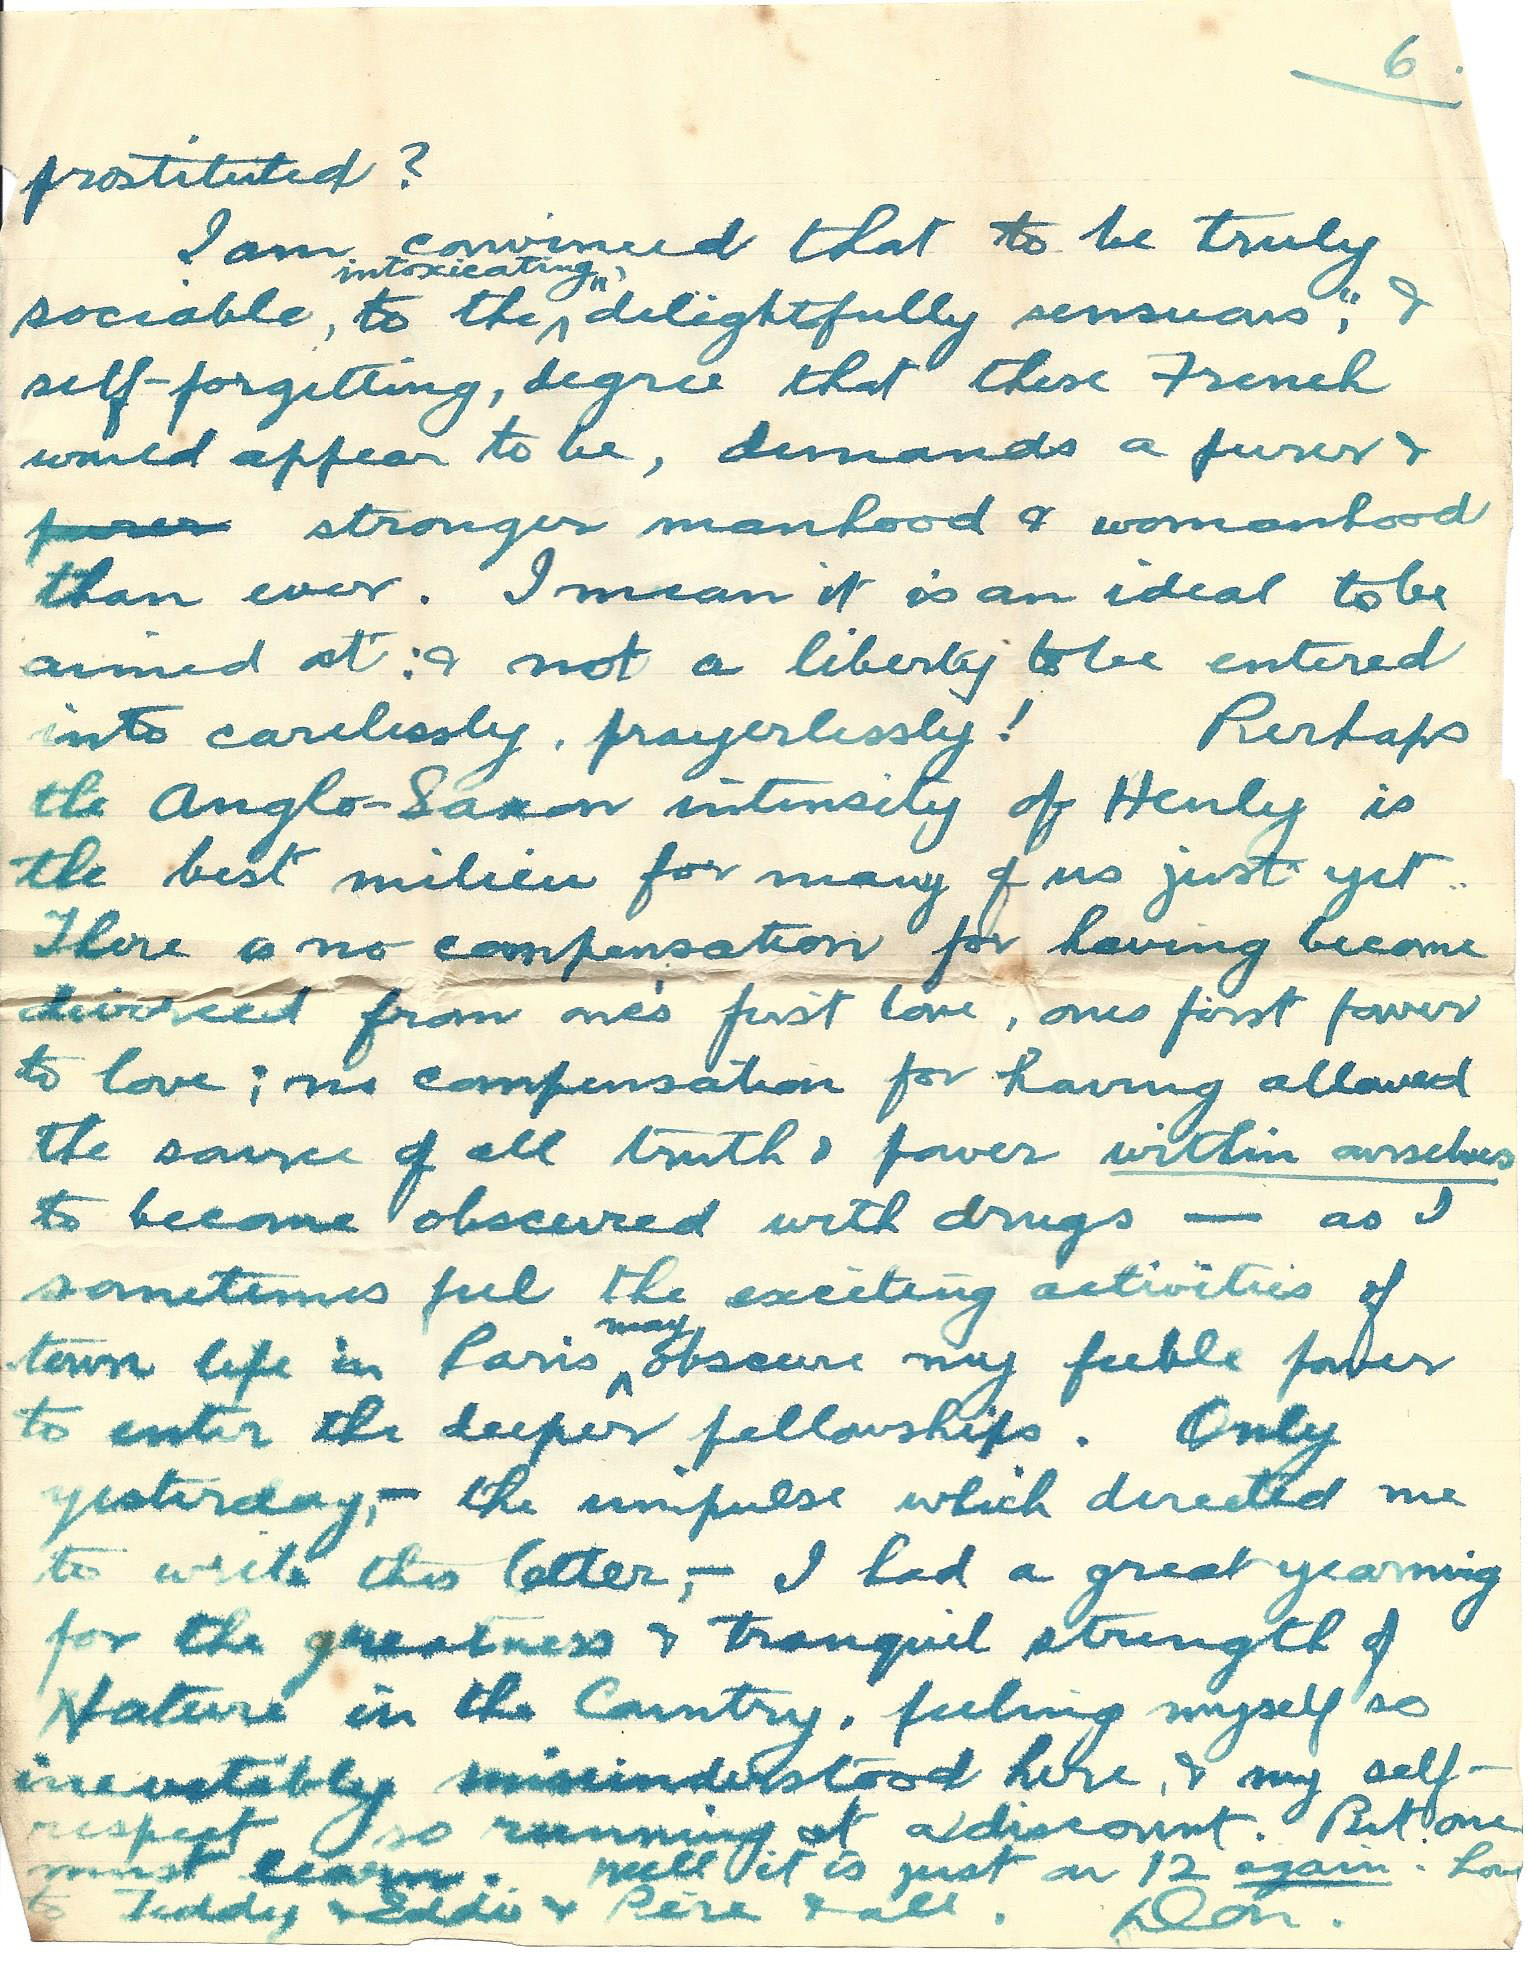 1919-08-19 p6 Donald Bearman letter to his father